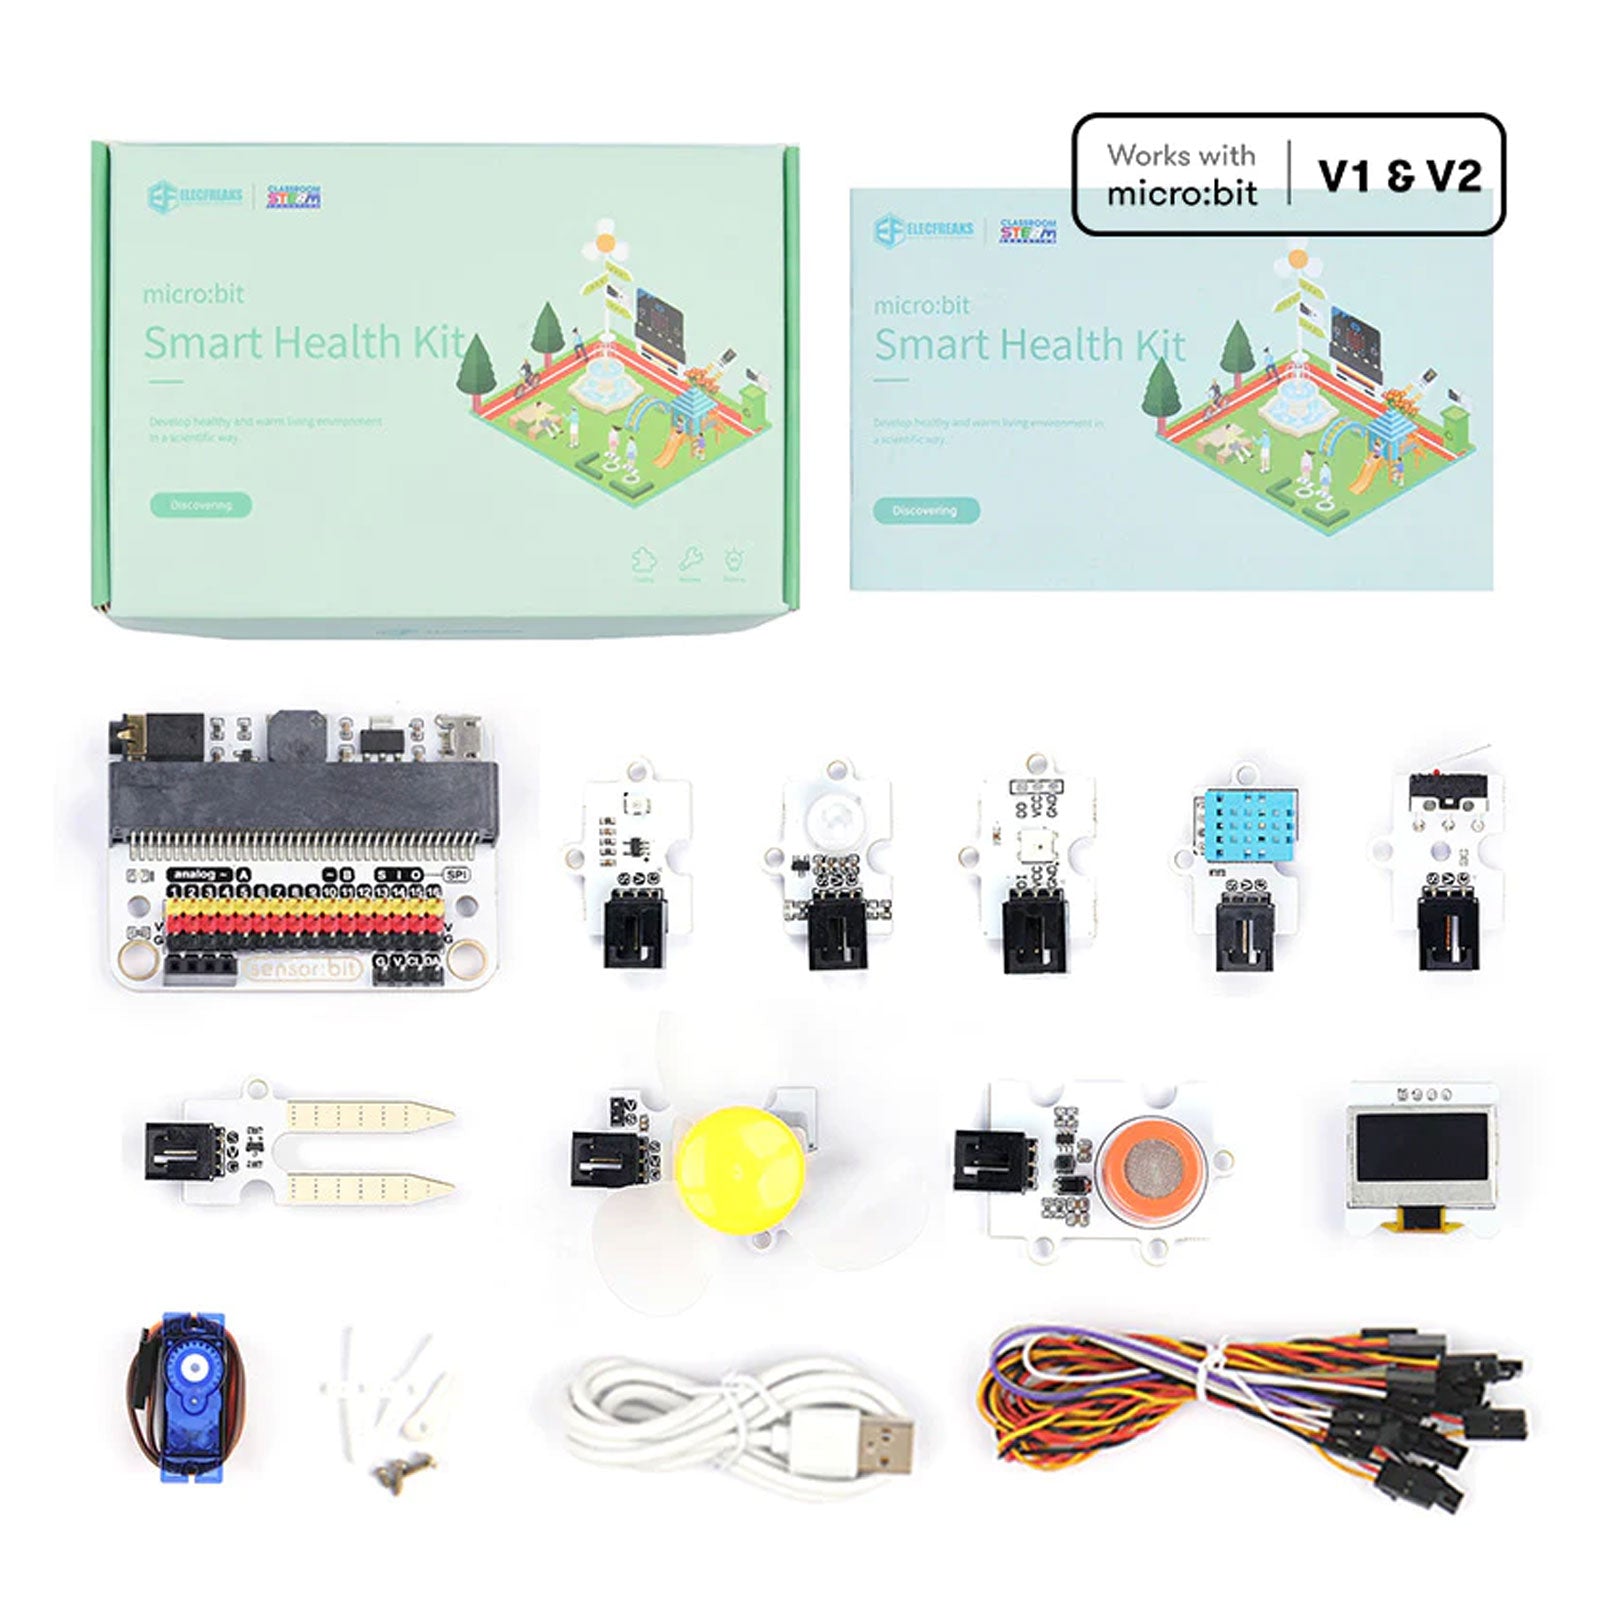 ELECFREAKS micro:bit Smart Health Kit, Electric Circuit Learning with Guidance Manual (Without micro:bit Board)